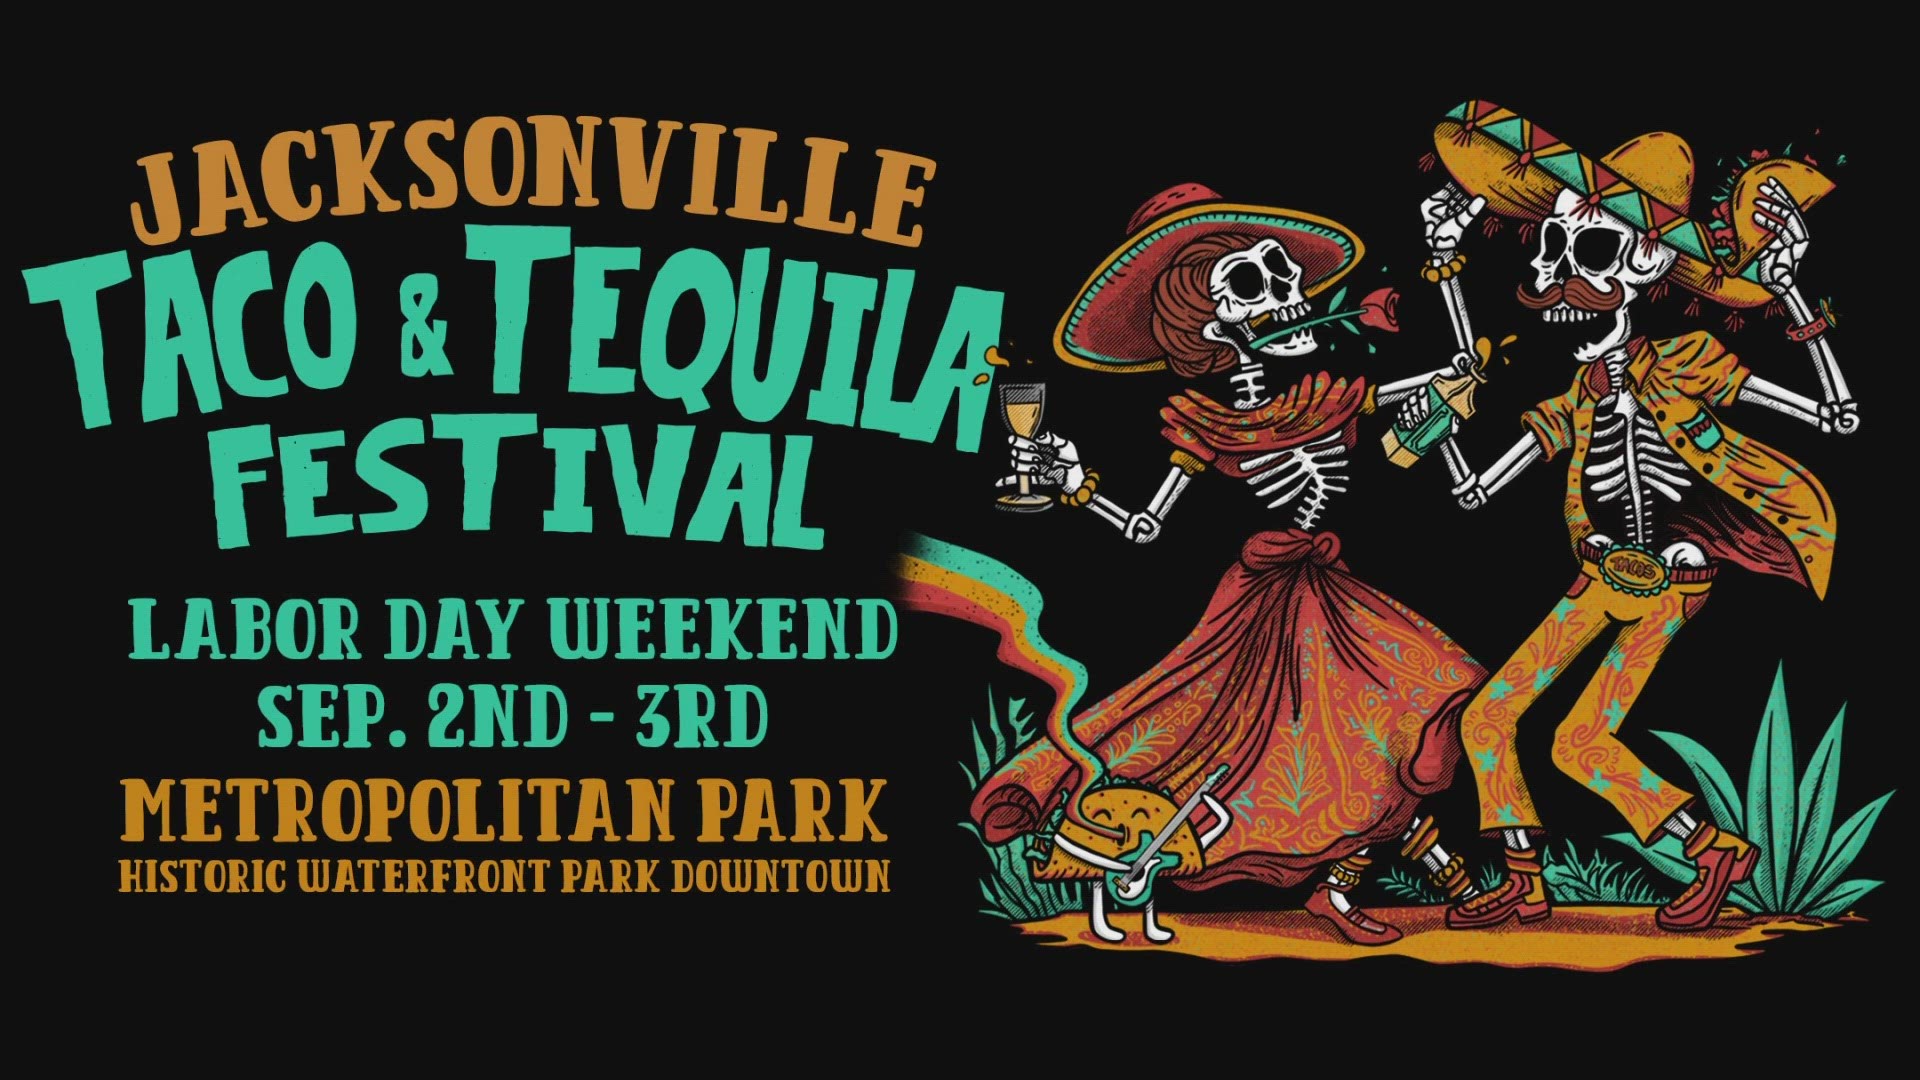 The festival is scheduled to take place on two dates - Sept. 2 and Sept. 3 at the waterfront Metropolitan Park in downtown Jacksonville. Ticket prices start at $35.